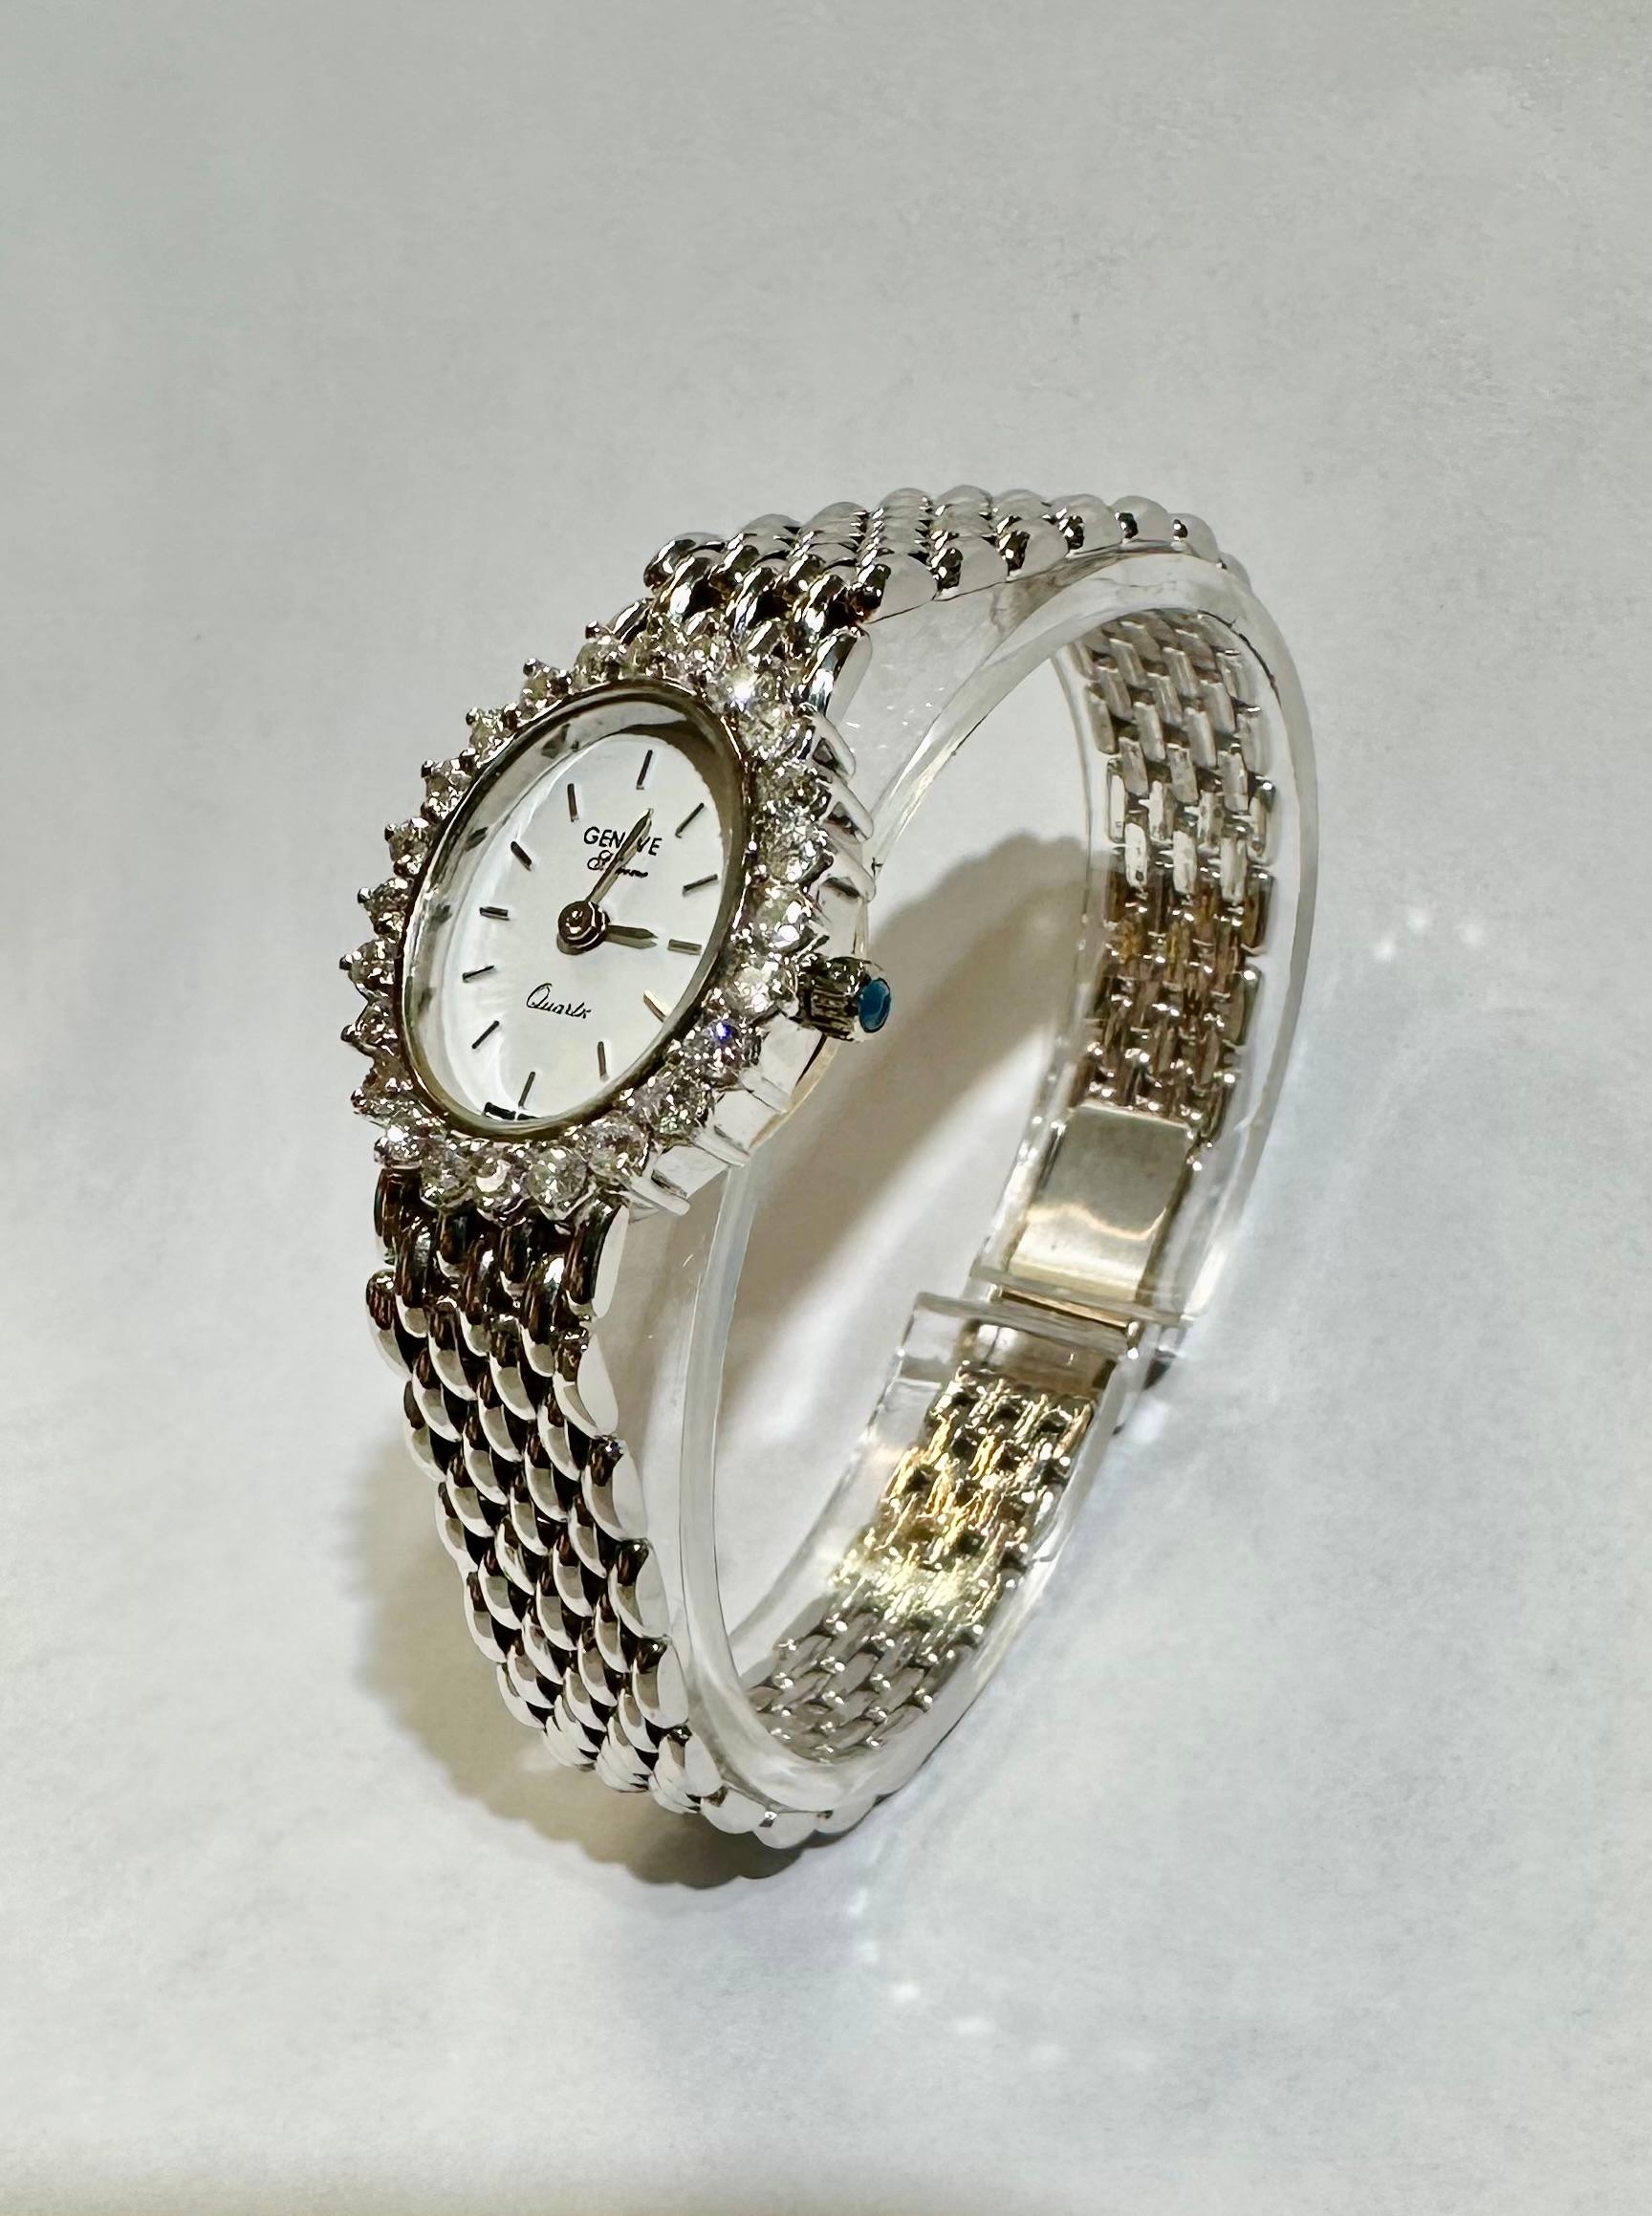 Description / Condition: All watches have been professionally scrutinized and serviced prior to being offered for sale. 

Gold Content: 14k yellow gold, total gold weight 36.1 grams. 